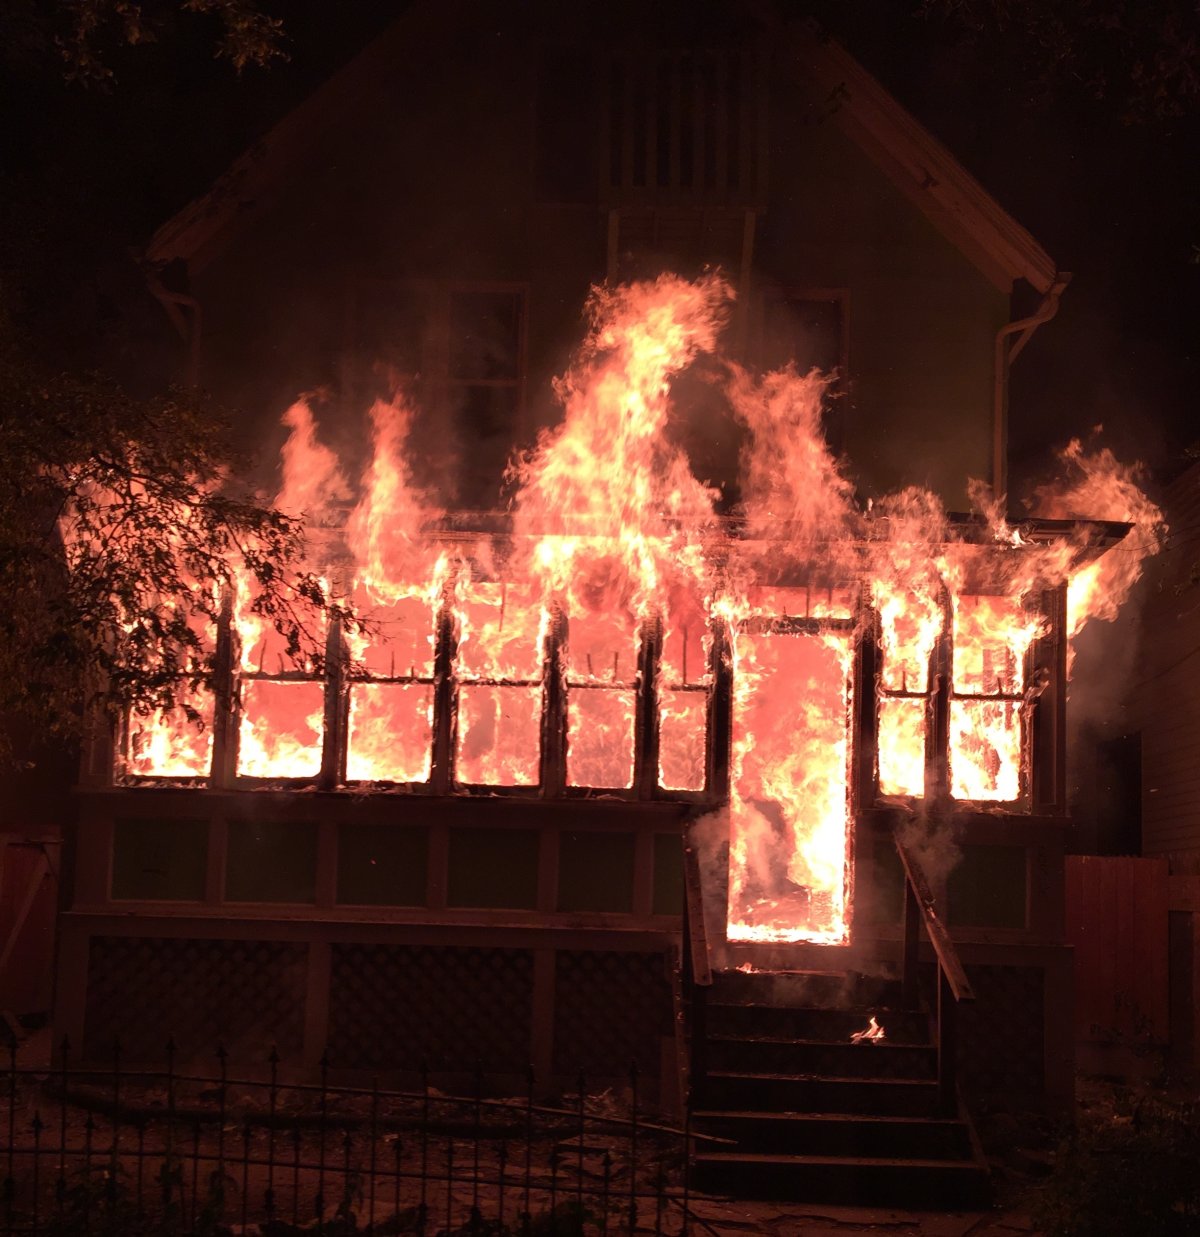 A fire on Austin St North claimed two lives.